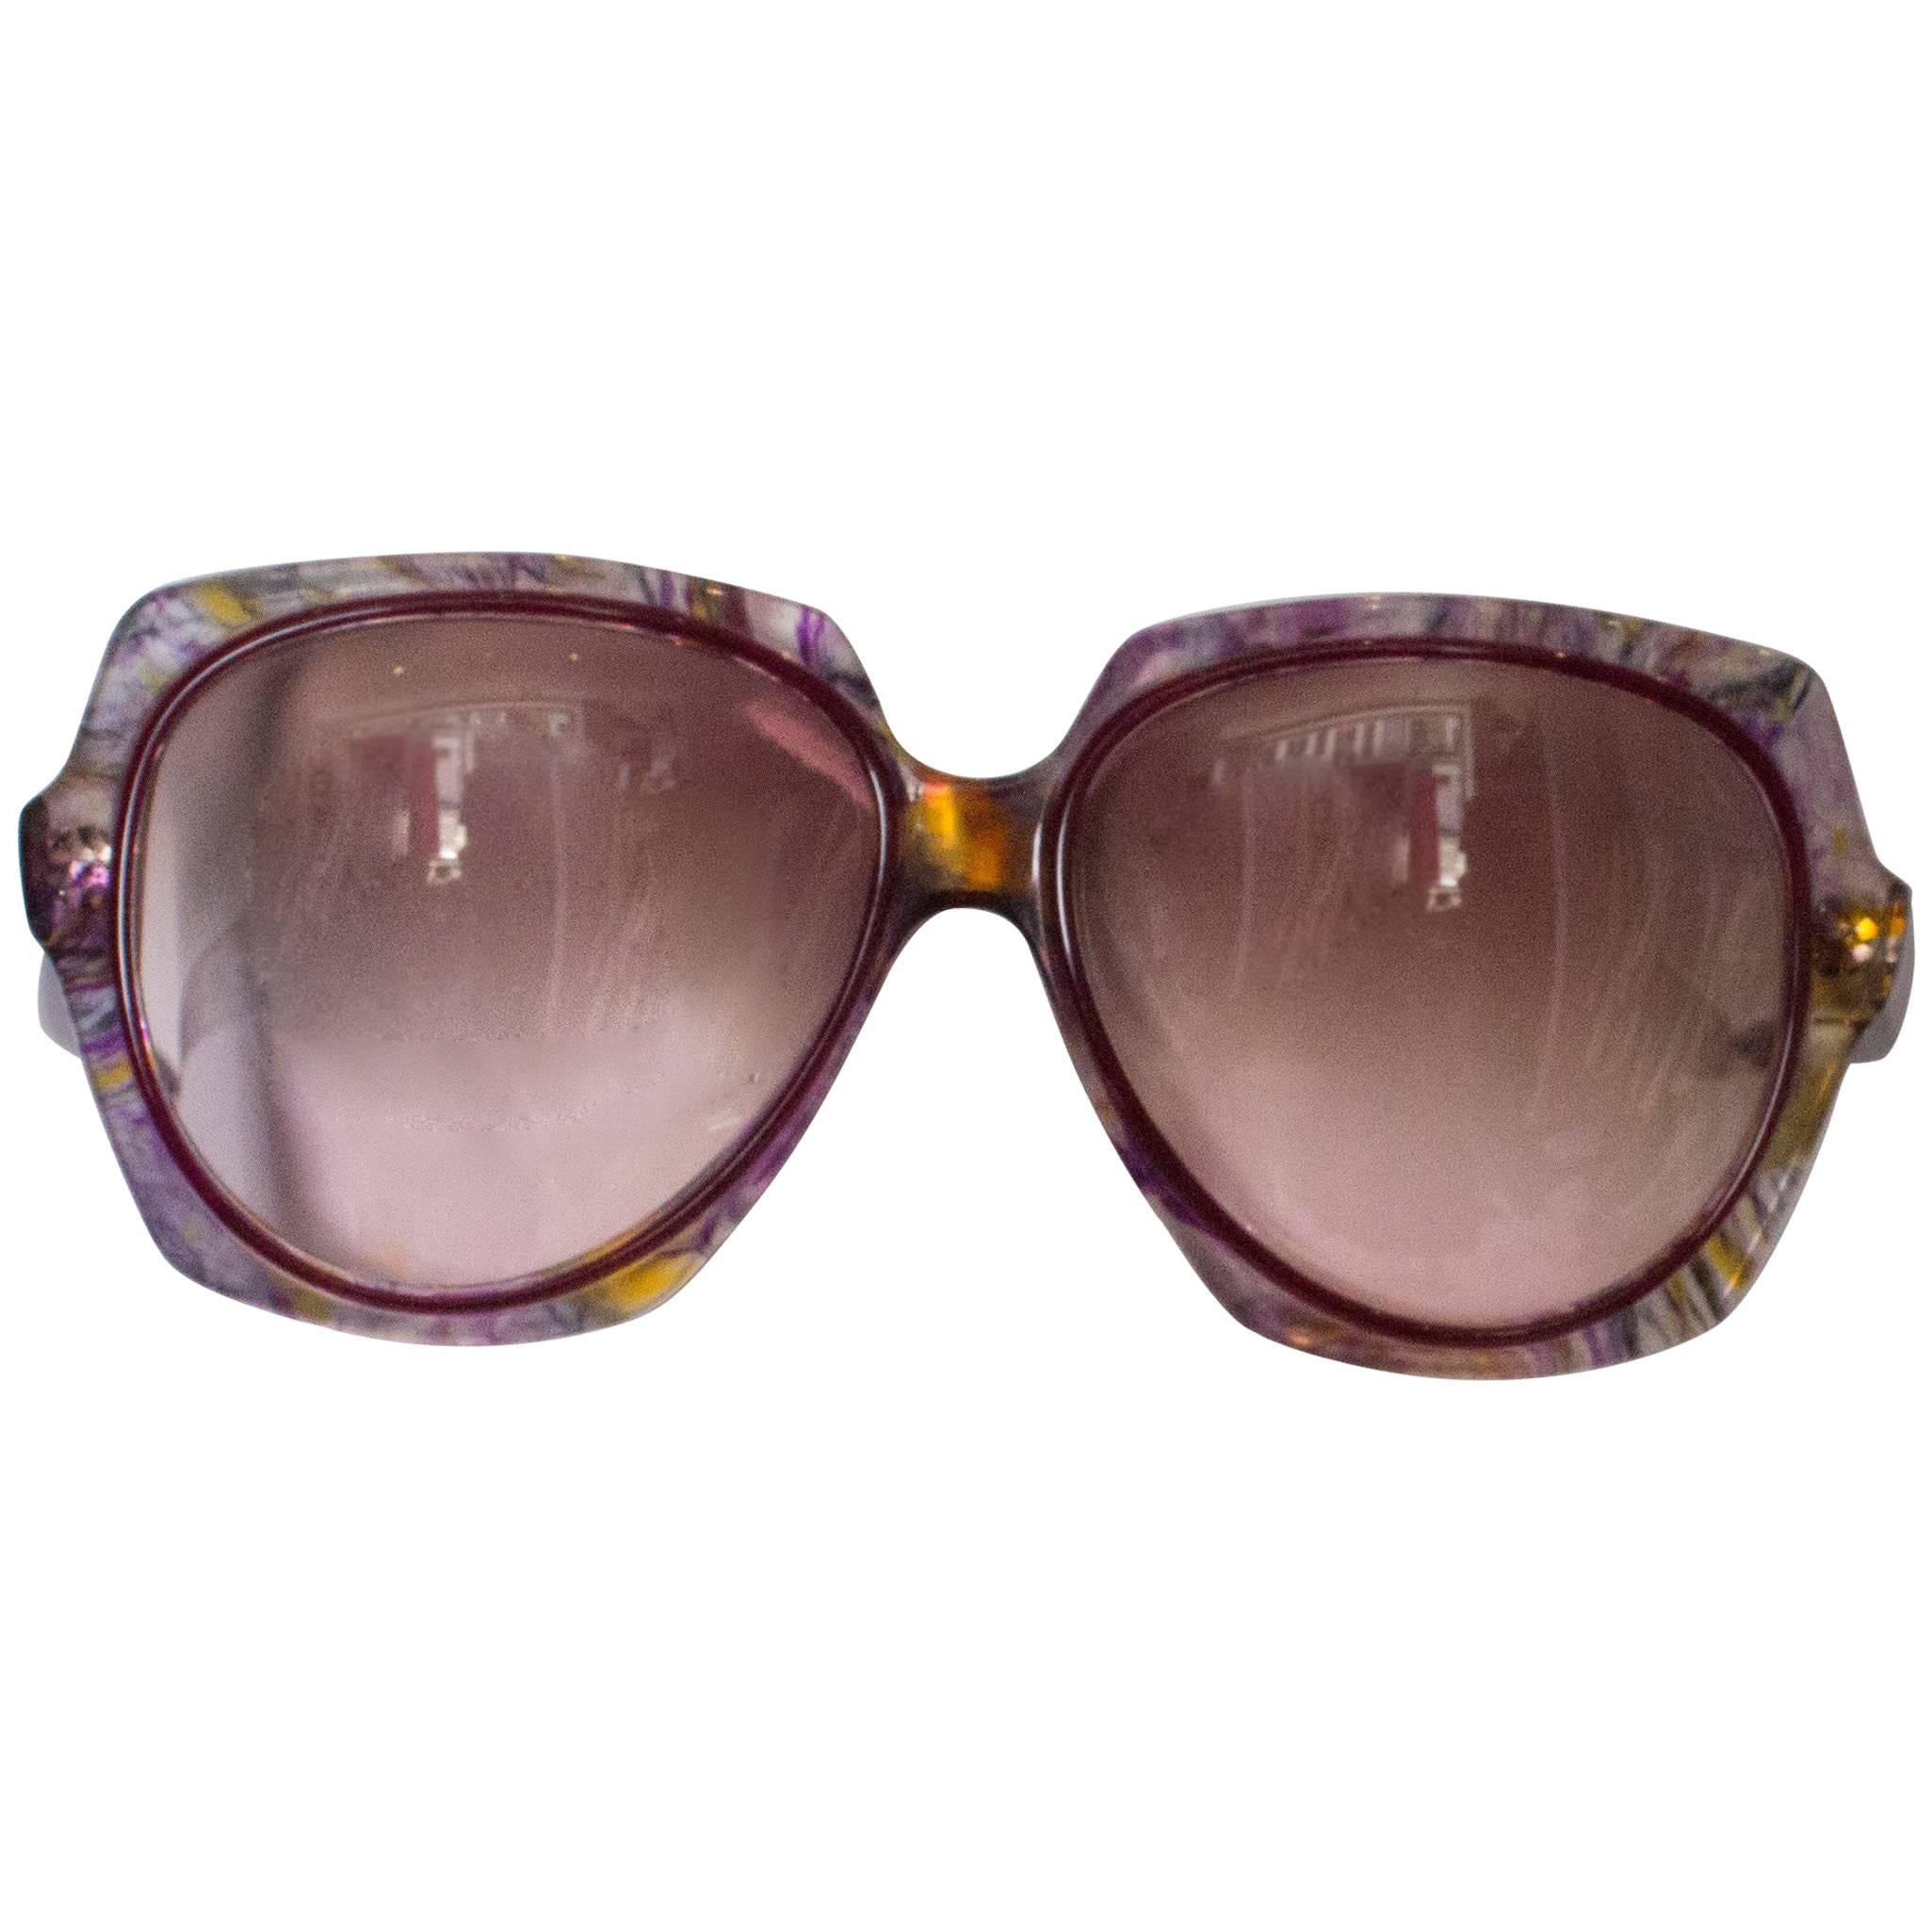 A pair of Vintage 1970s sunglassses by Oliver Goldsmith